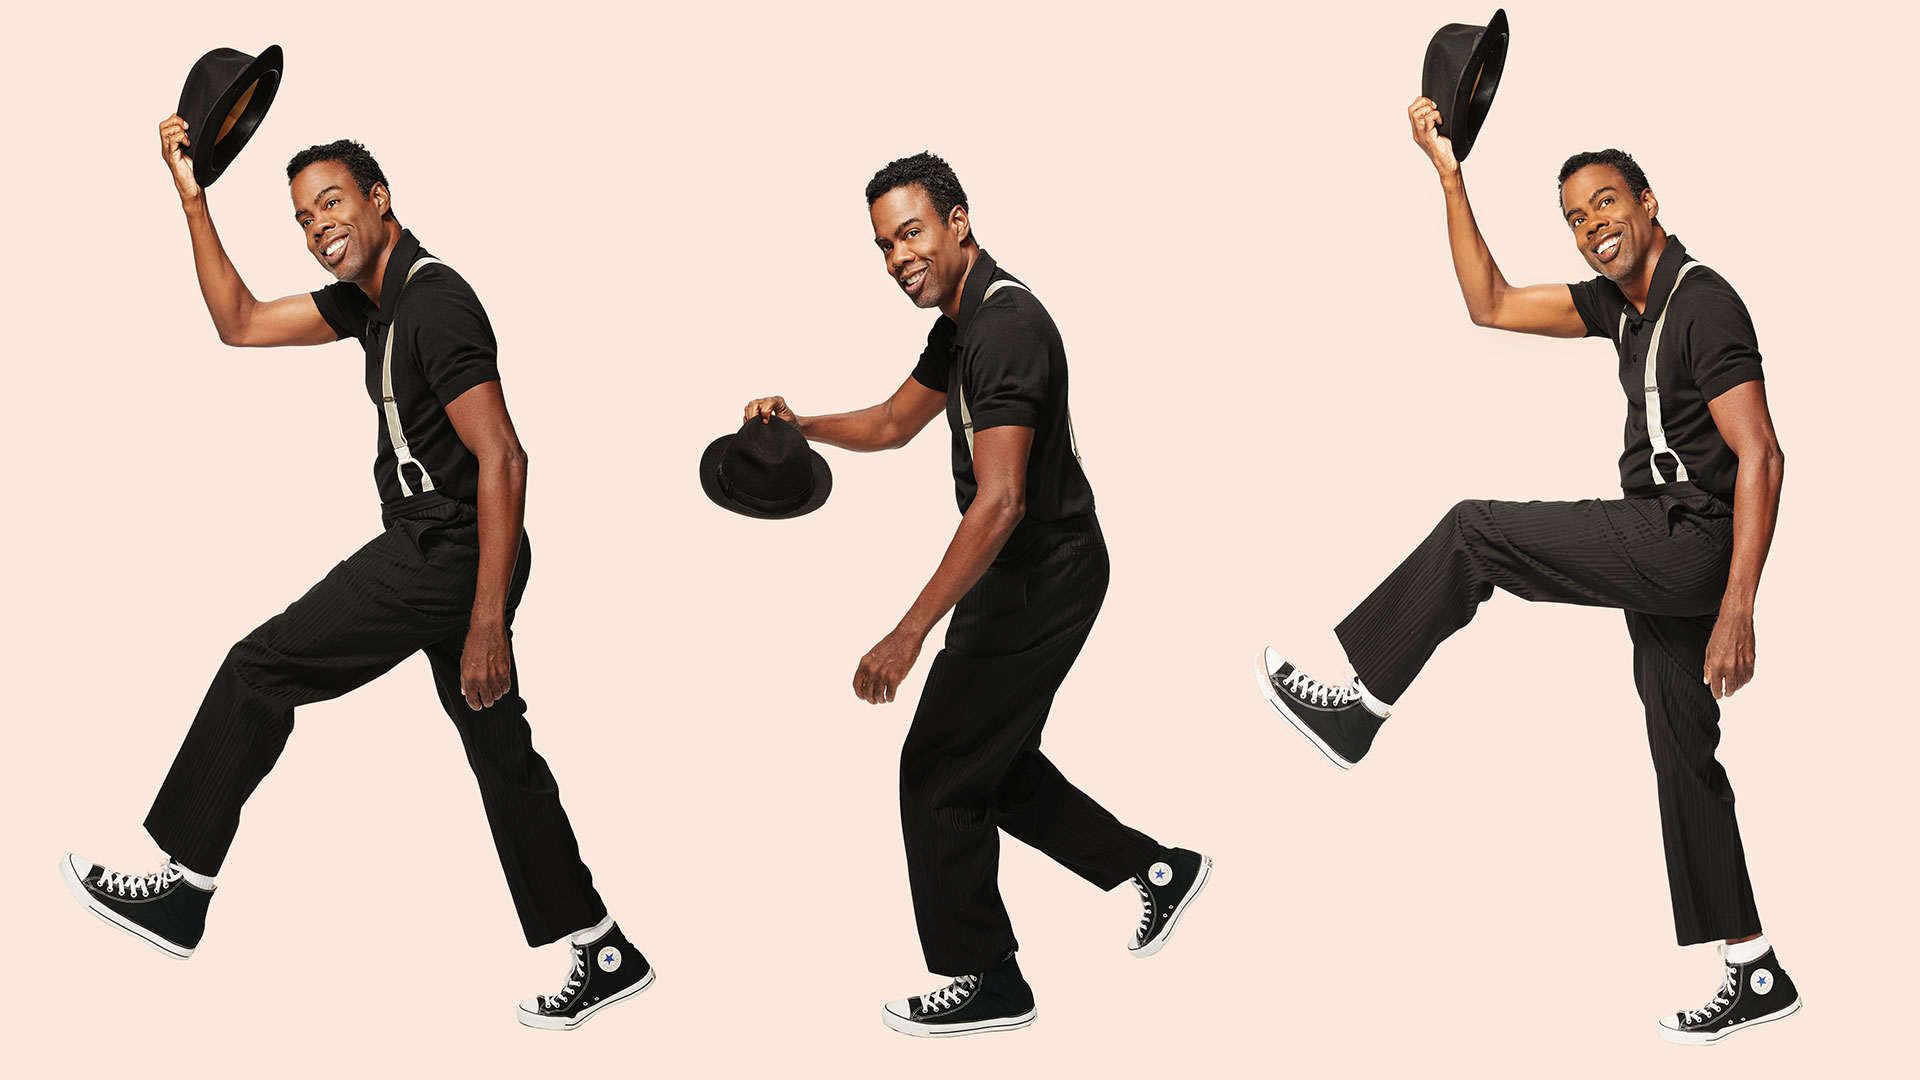 Chris Rock x3 on cream background, tipping his hat to yo. He's wearing converse, black pants, black shirt, and white suspenders.